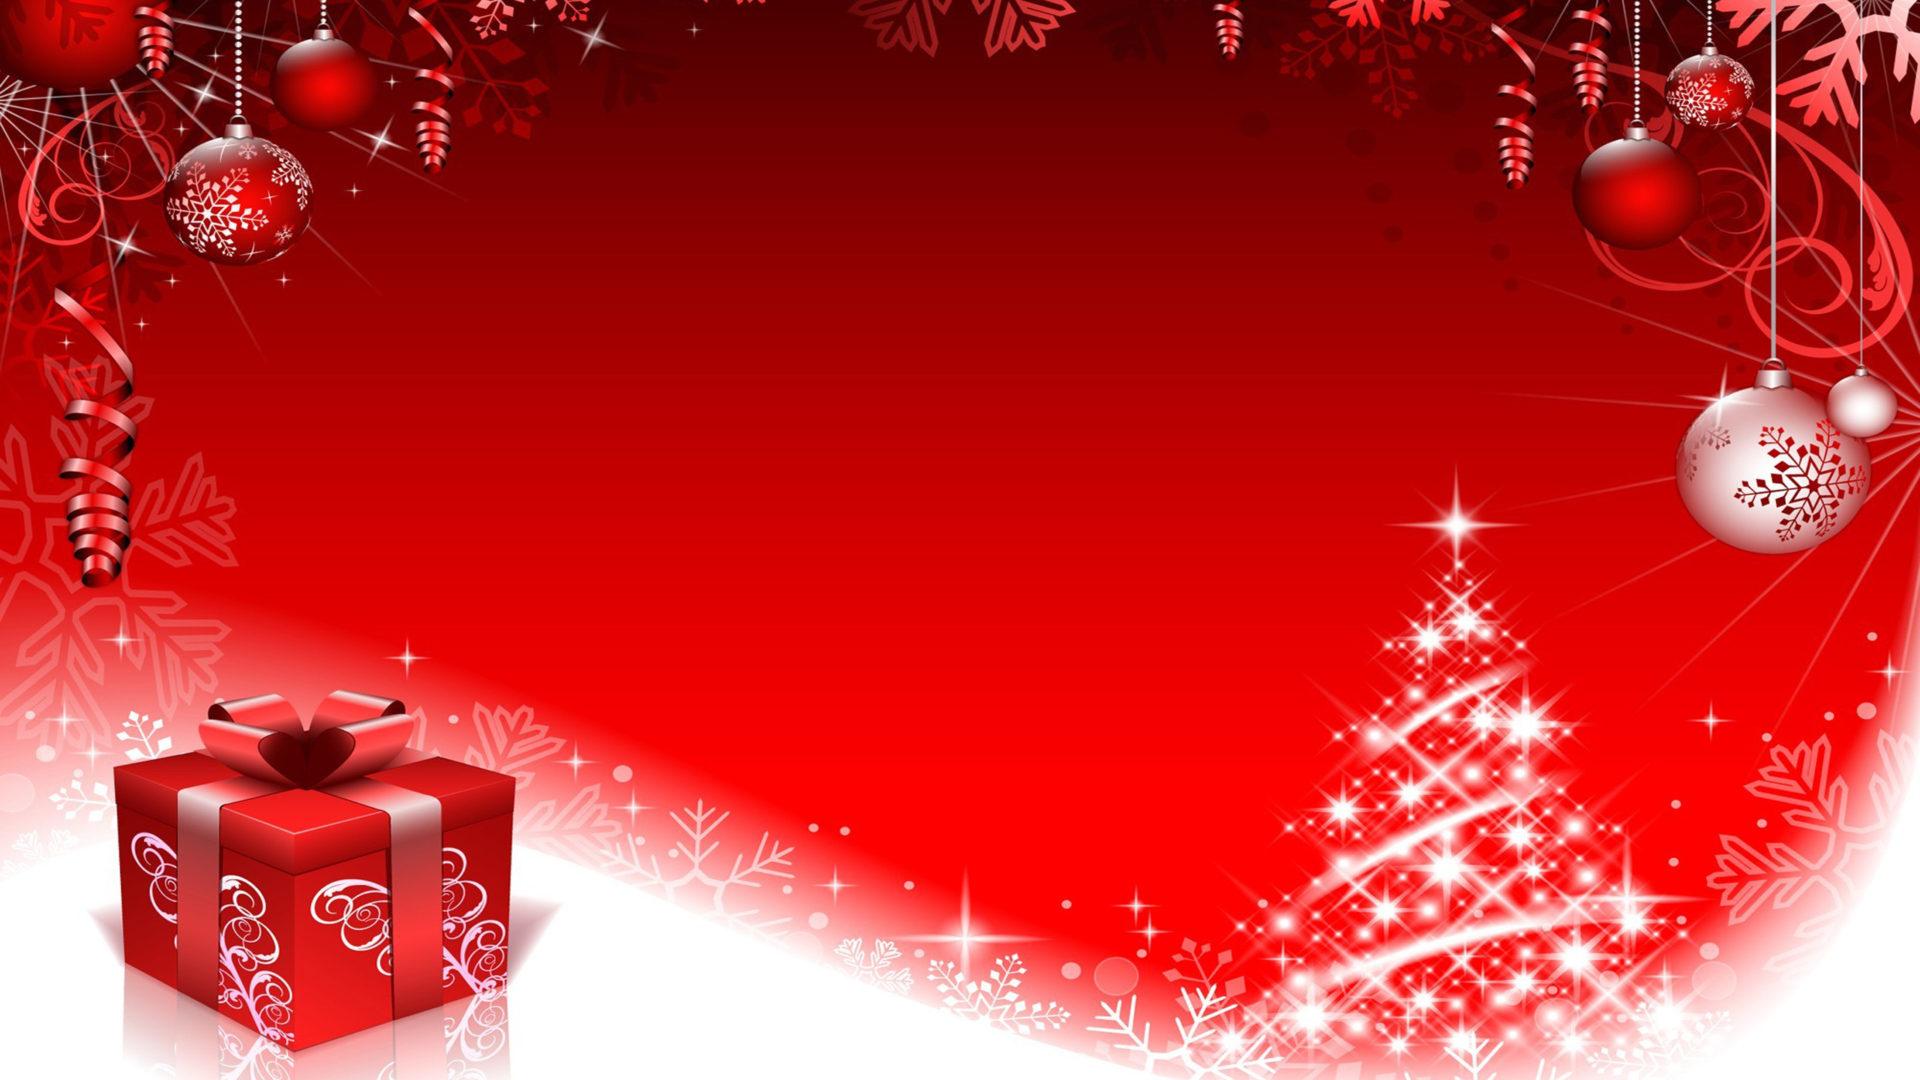 1920 x 1080 · jpeg - Red Christmas Decorations With Snowflakes Background Images 2560x1600 ...